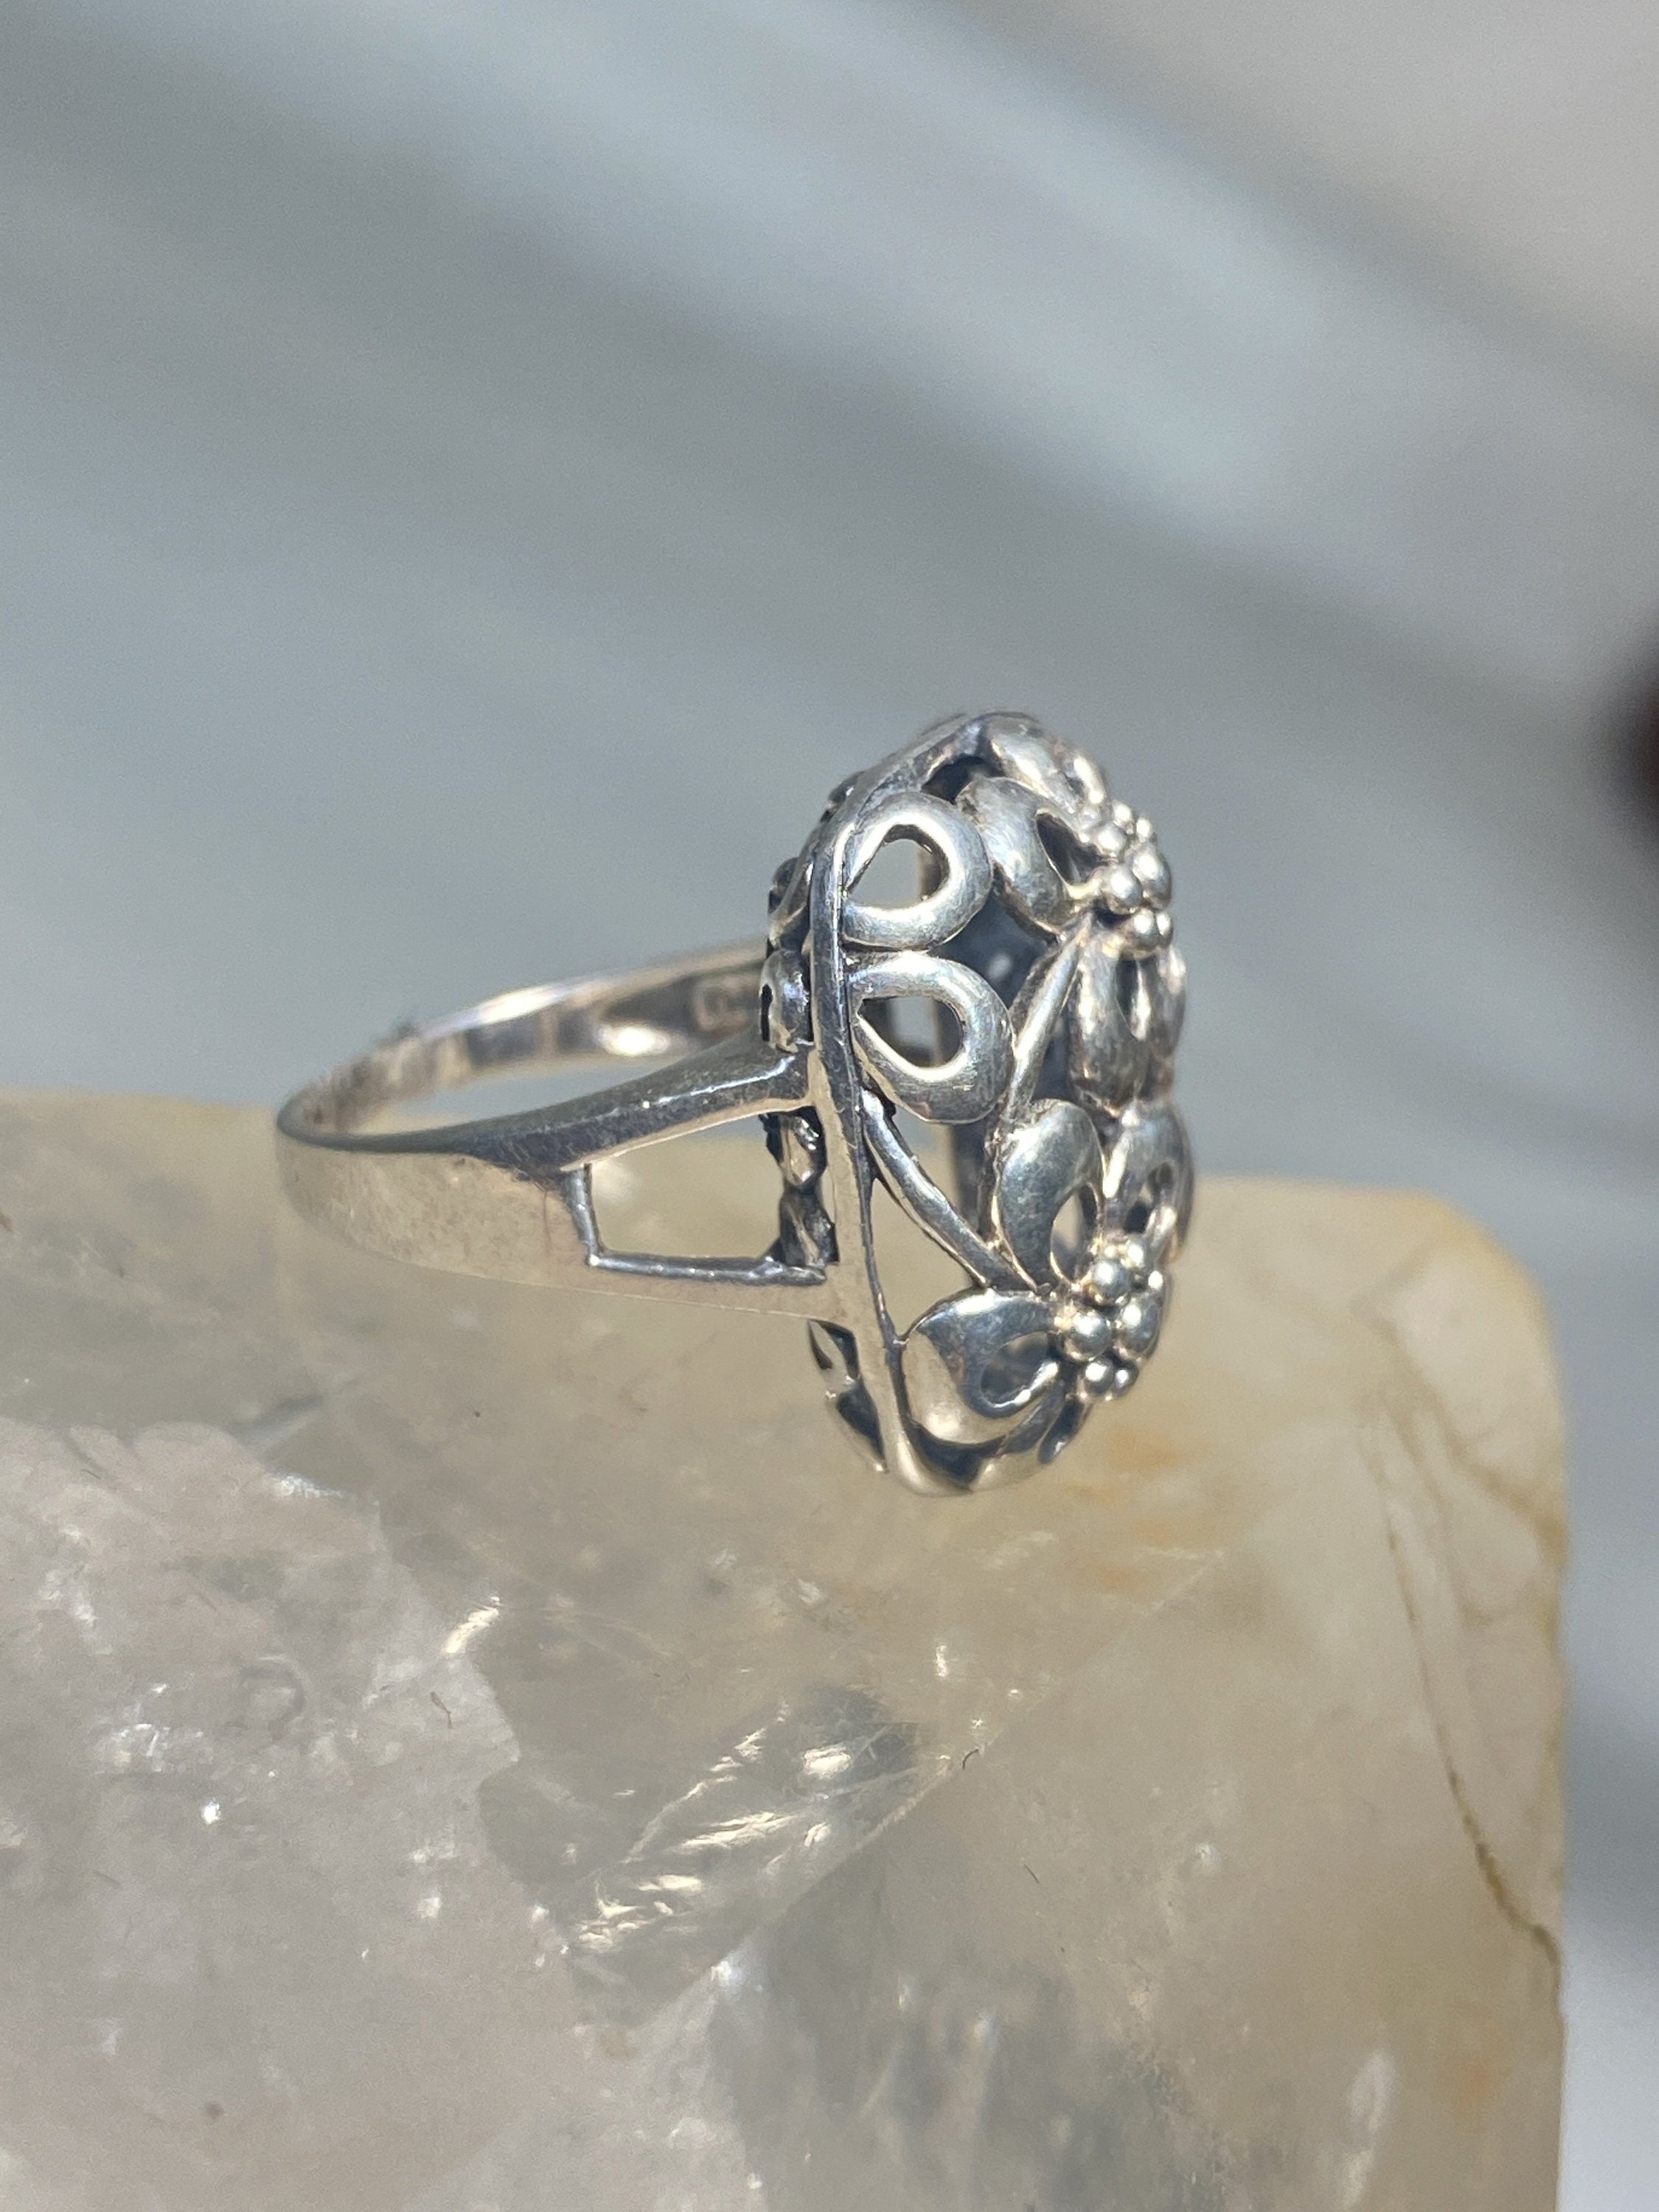 Floral Ring Flowers Band Sterling Silver Women Girls Size 6 - Etsy